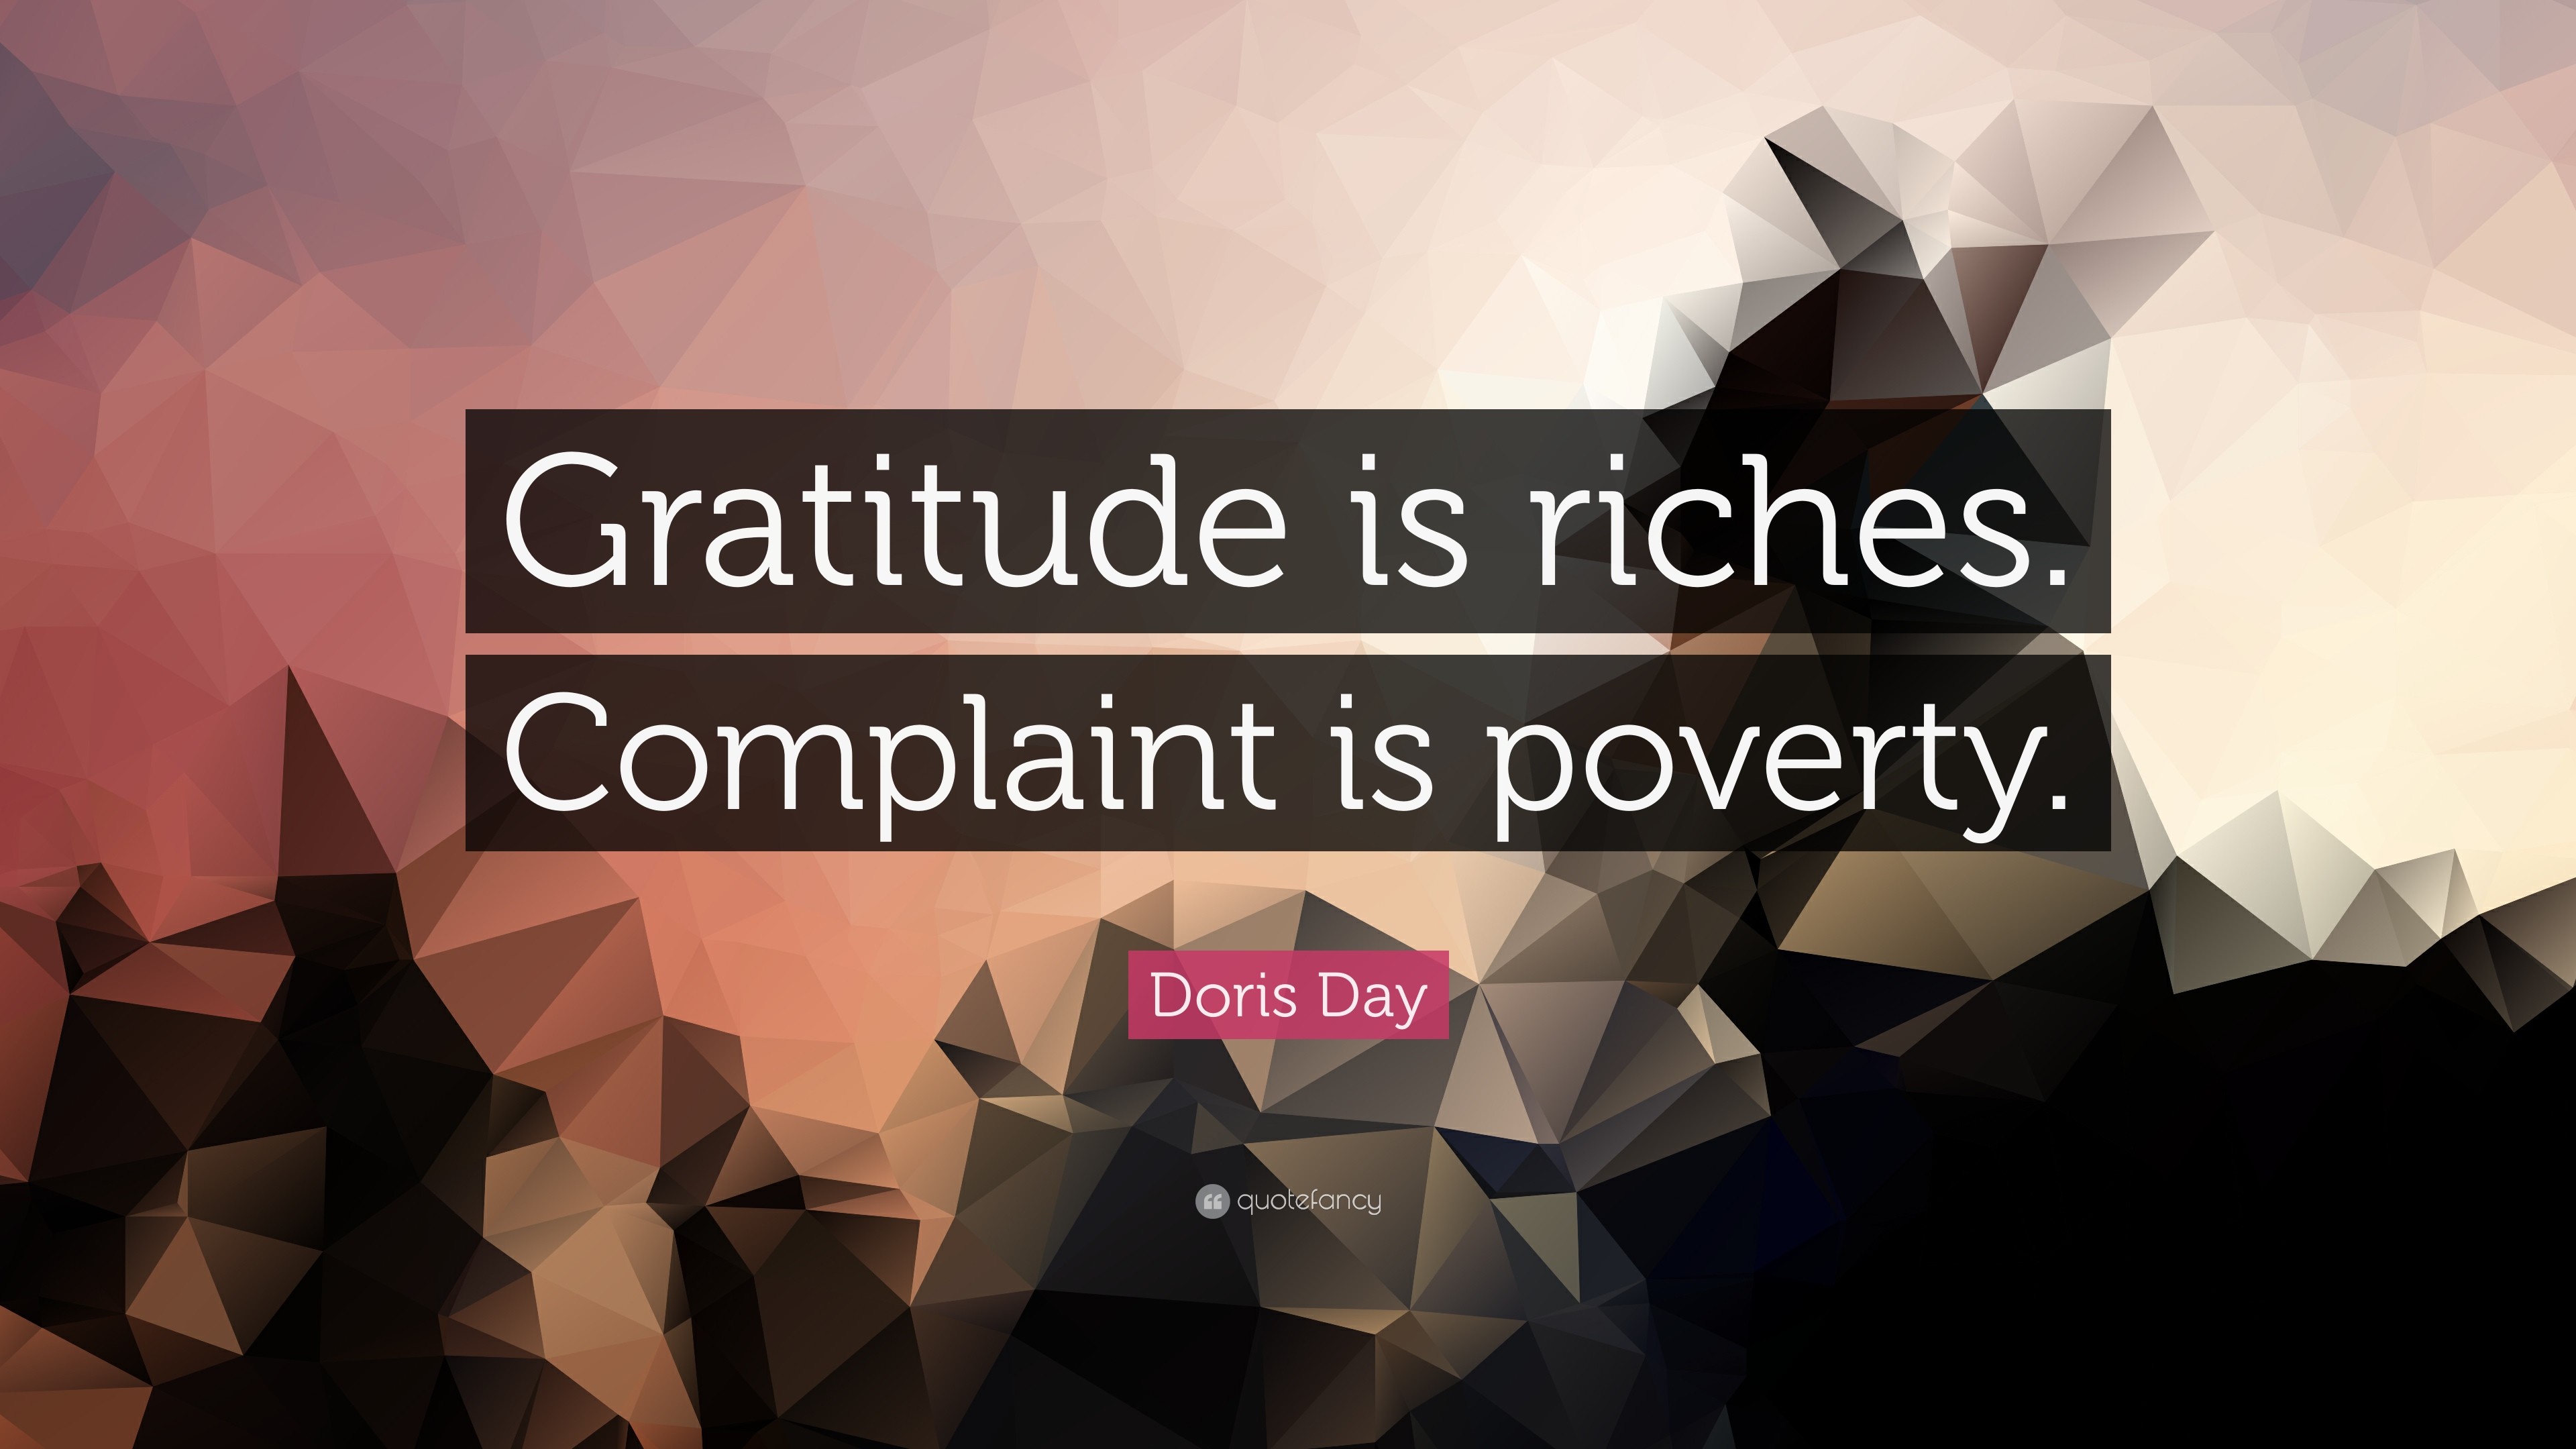 3840x2160 Doris Day Quote: “Gratitude is riches. Complaint is poverty.”